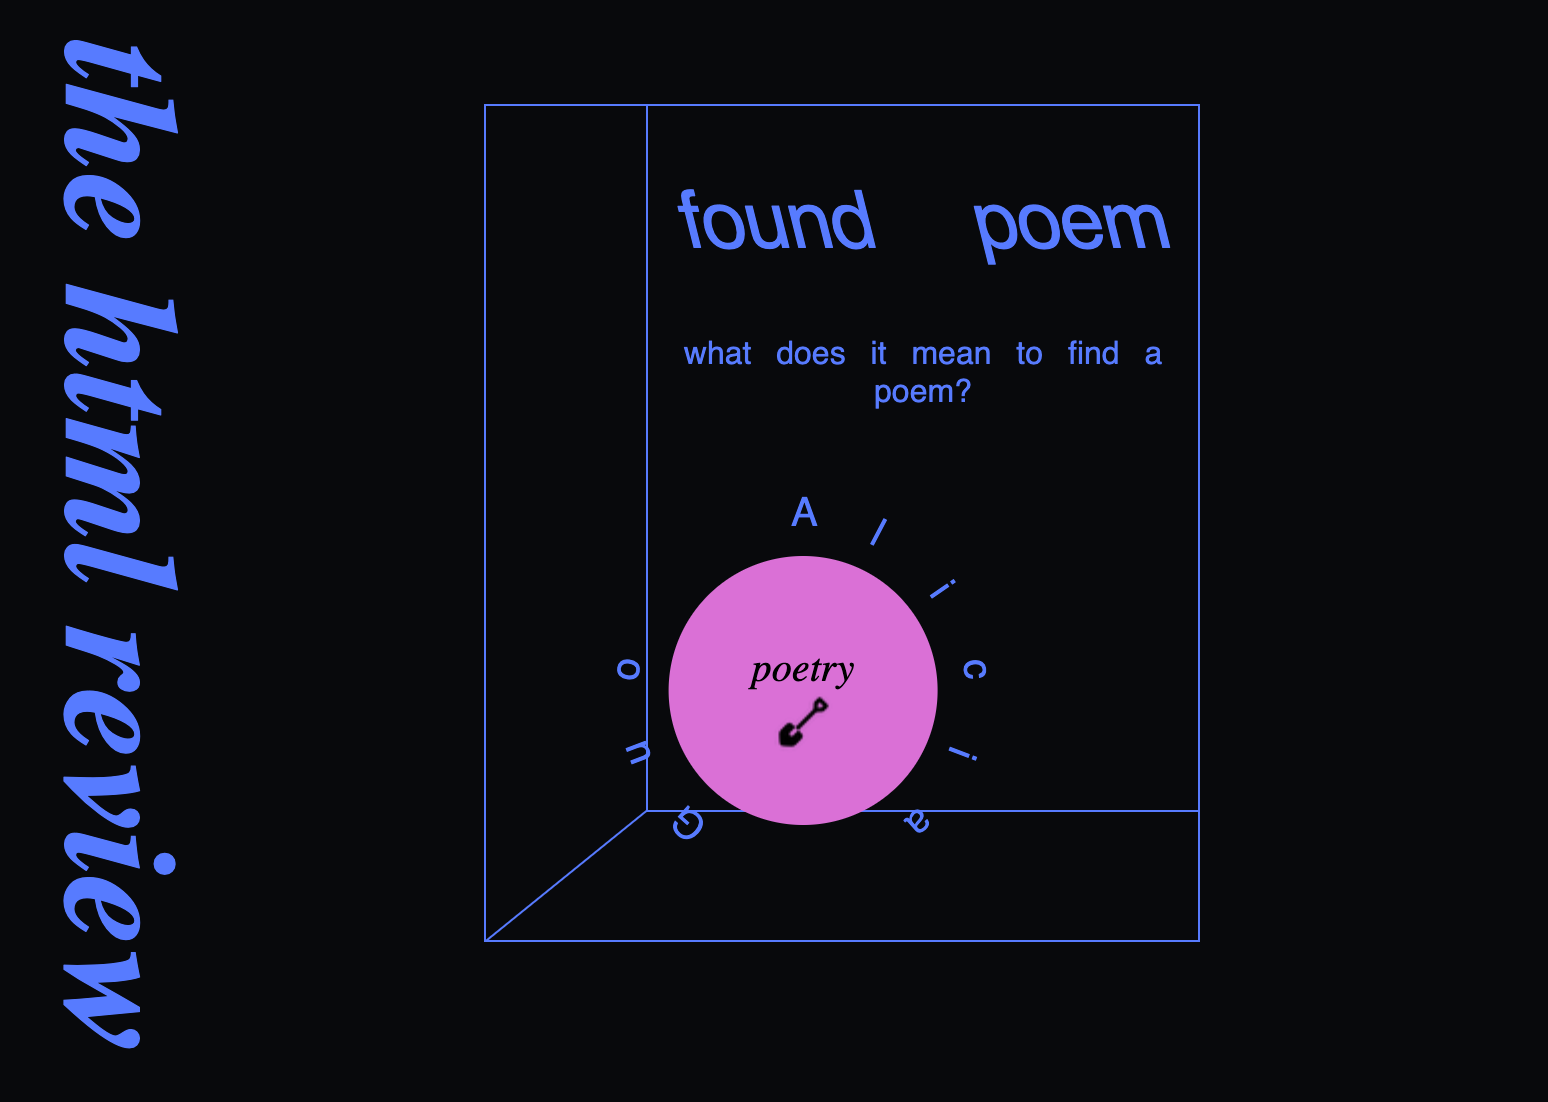 dark blue background with horizontal text saying The HTML Review on the left side, and on the right a bordered box containing the title Found Poem and a pink circle with a shovel graphic in it